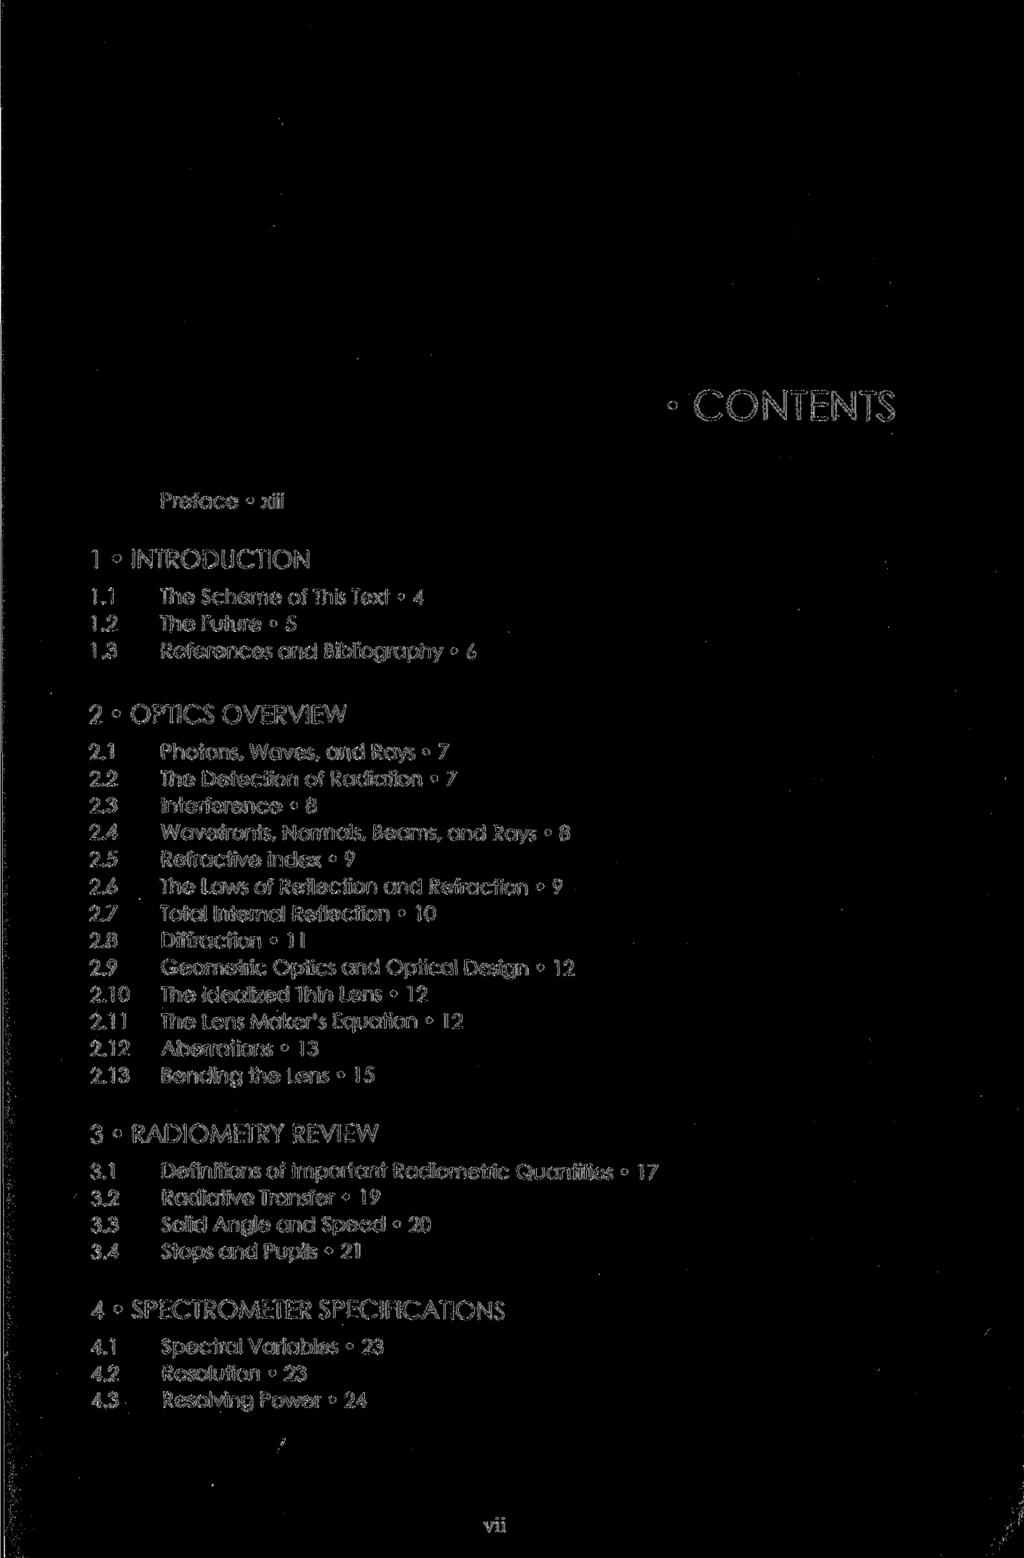 CONTENTS Preface xiii 1 INTRODUCTION 1.1 The Scheme of This Text 4 1.2 The Future 5 1.3 References and Bibliography 6 2 OPTICS OVERVIEW 2.1 Photons, Waves, and Rays 7 2.